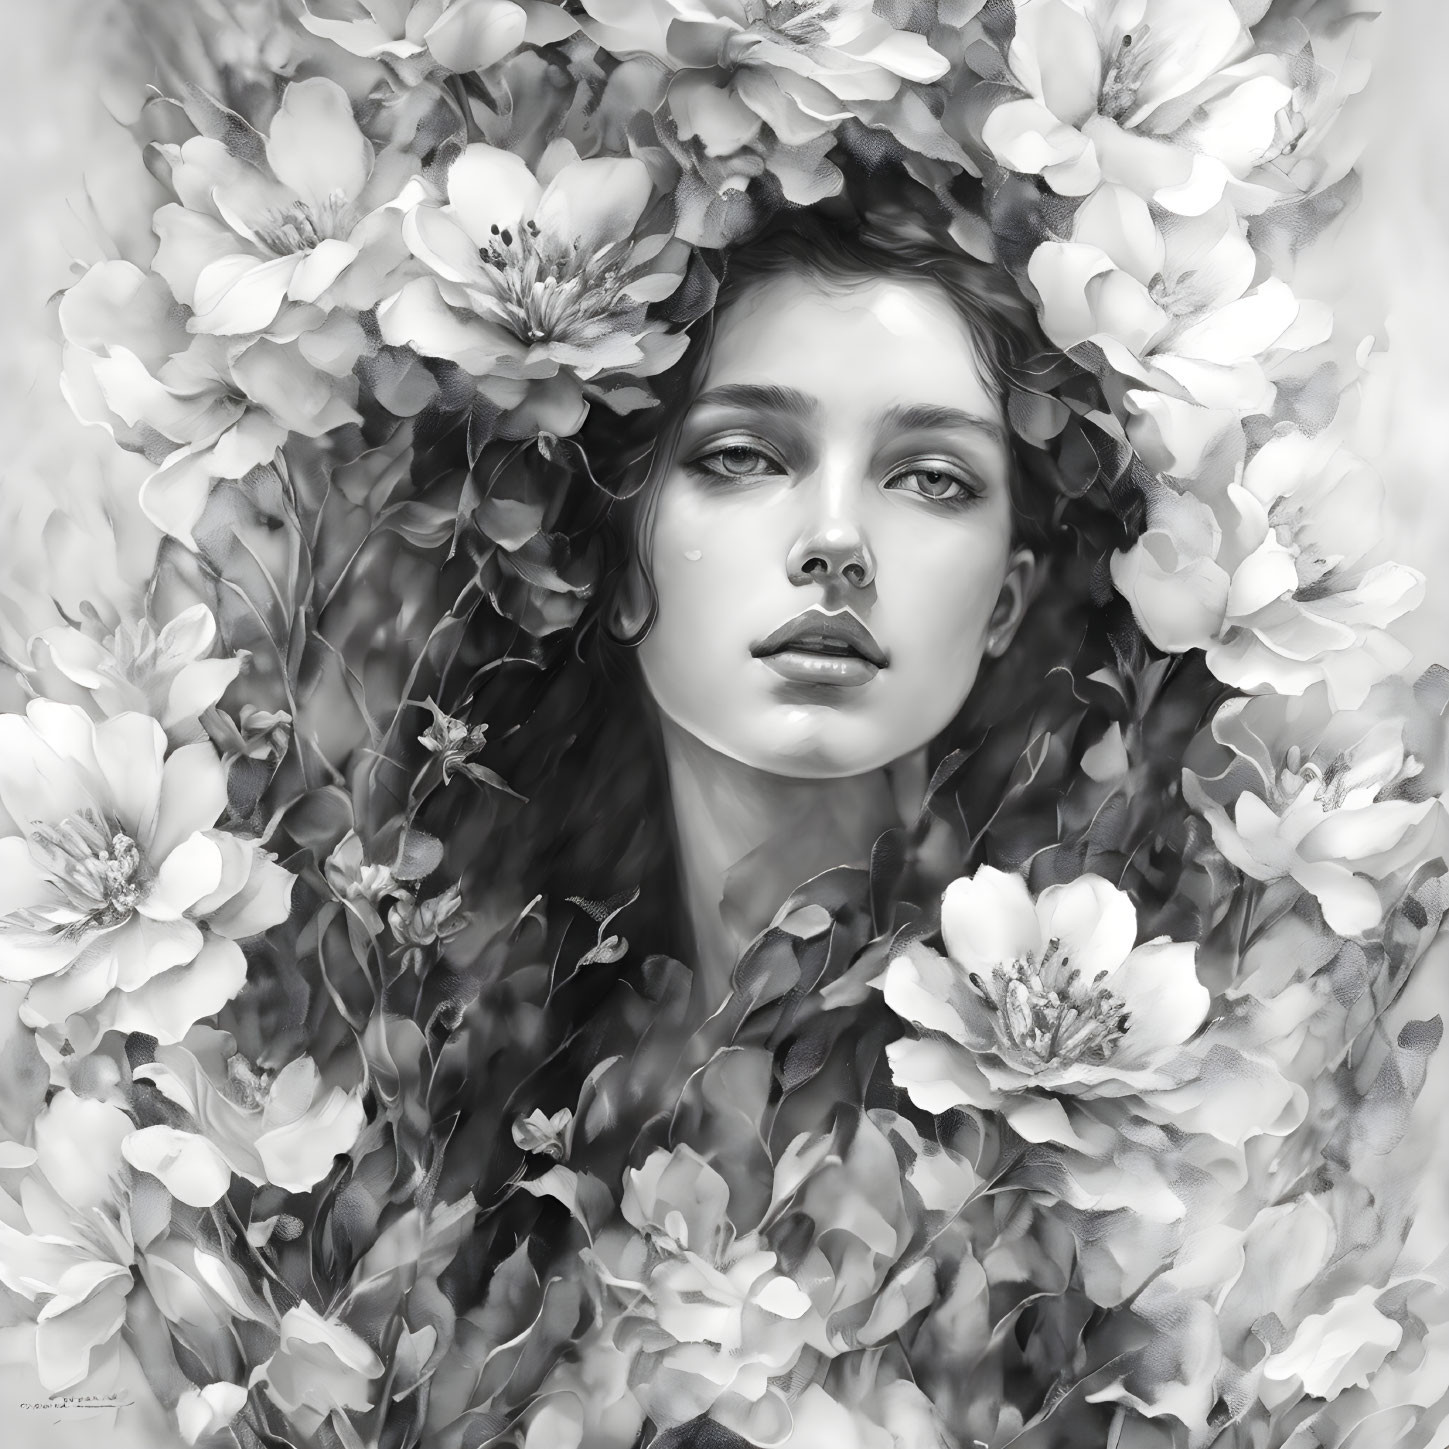 Monochrome image of woman with serene expression surrounded by floral blossoms